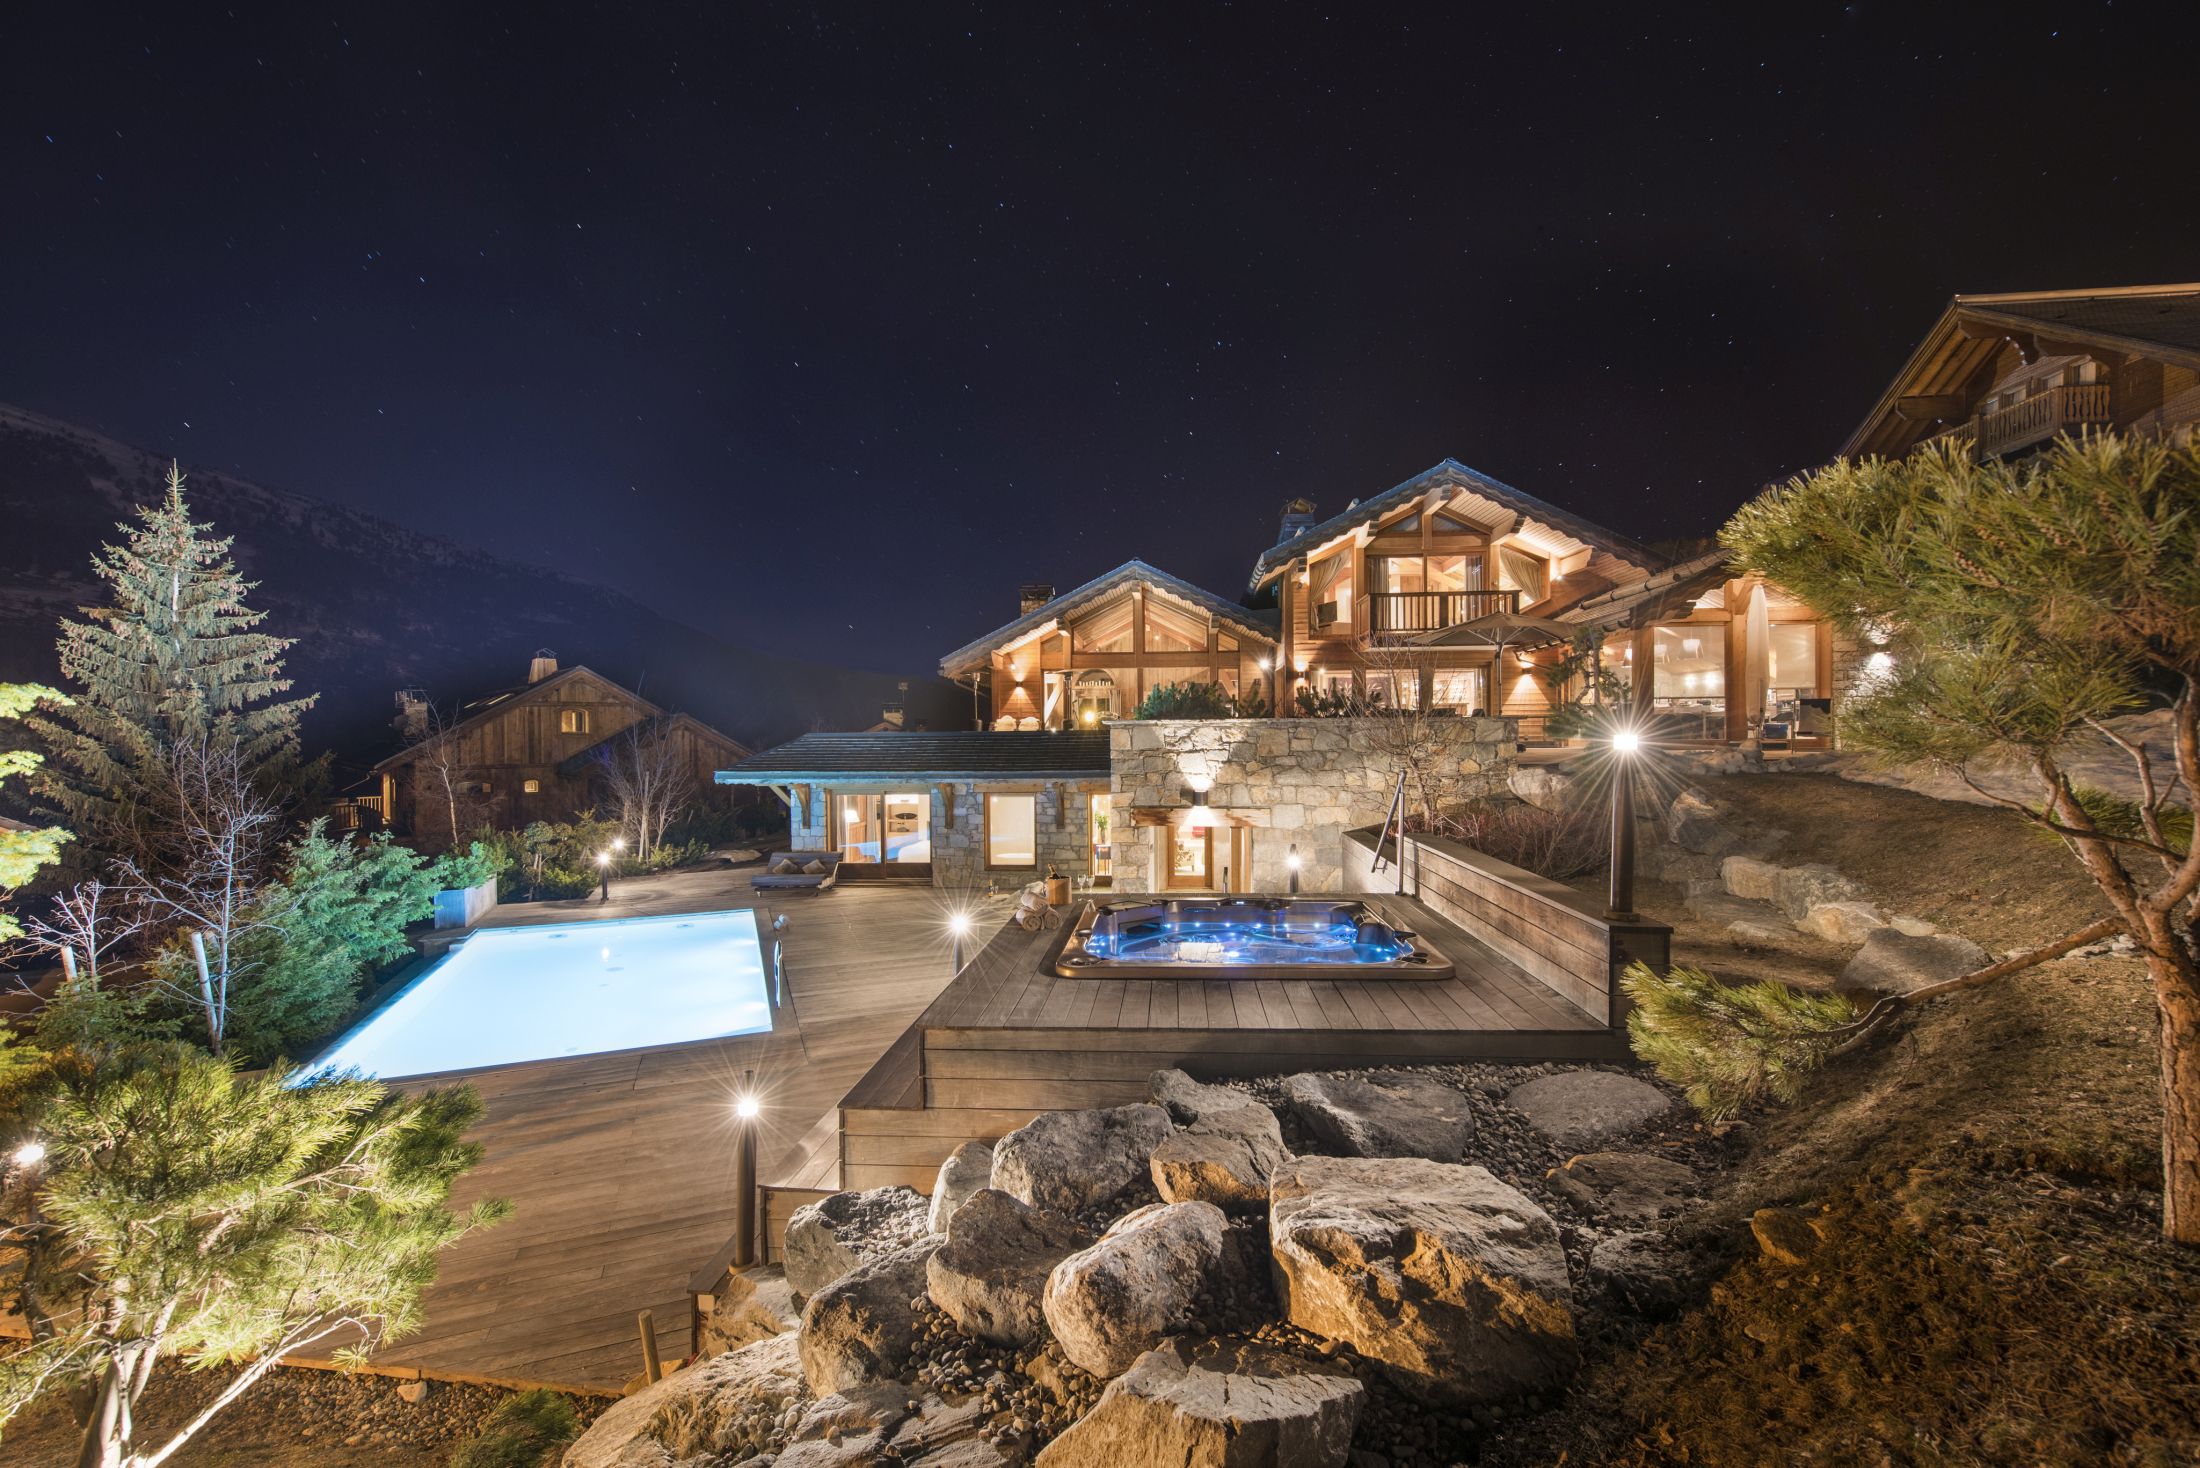 The exterior of Chalet Mont Tremblant, a luxury ski chalet in Meribel, featuring a luxury outdoor pool and hot tub with mountain views.